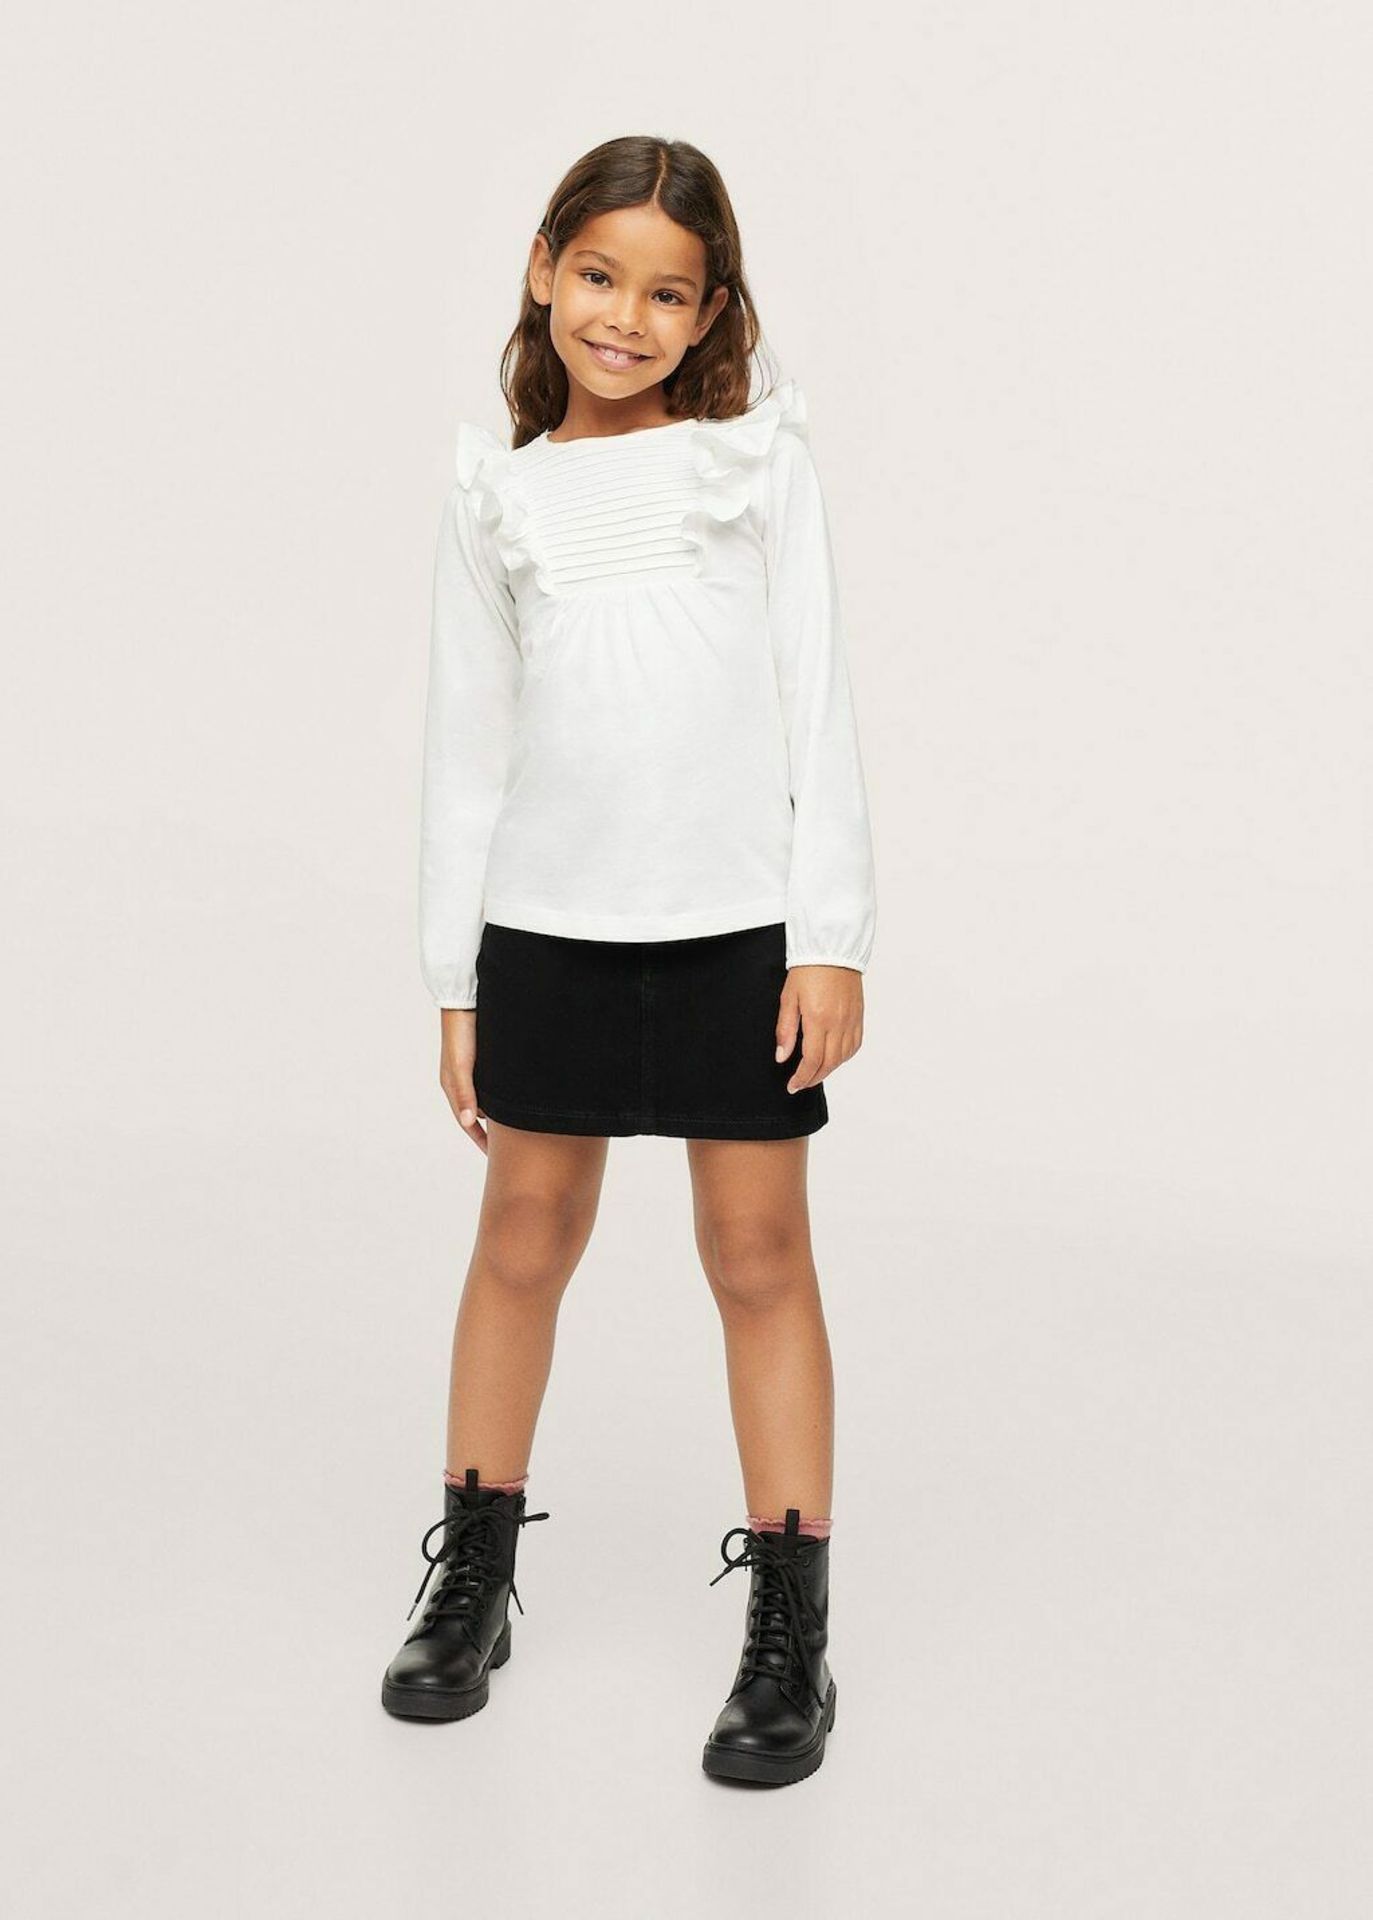 3 x Mango Long sleeved t-shirt with ruffles (SIZE 9 -10 YEARS) - Image 2 of 4